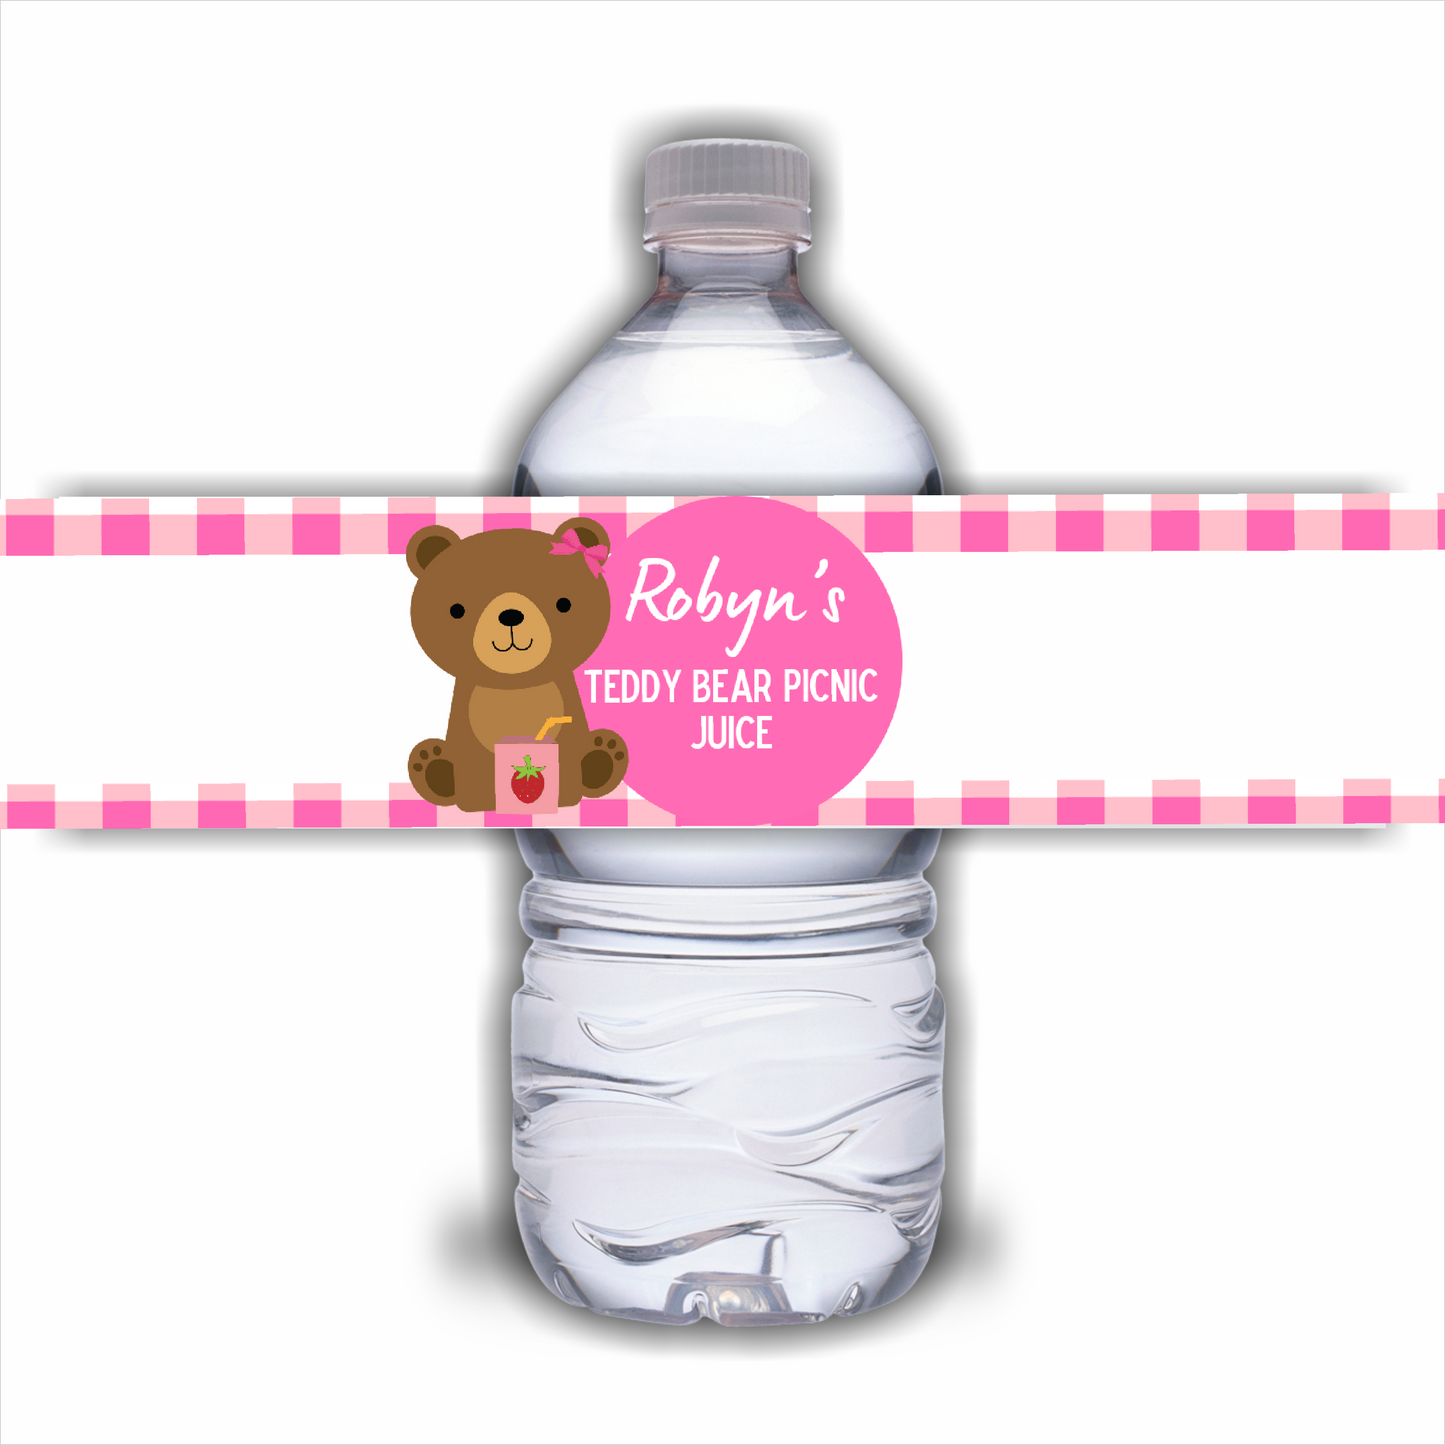 Juice Bottle Labels | Pink Teddy Bear Picnic Labels | Water Bottle Stickers | Teddy Bear Picnic Party | Party Stickers